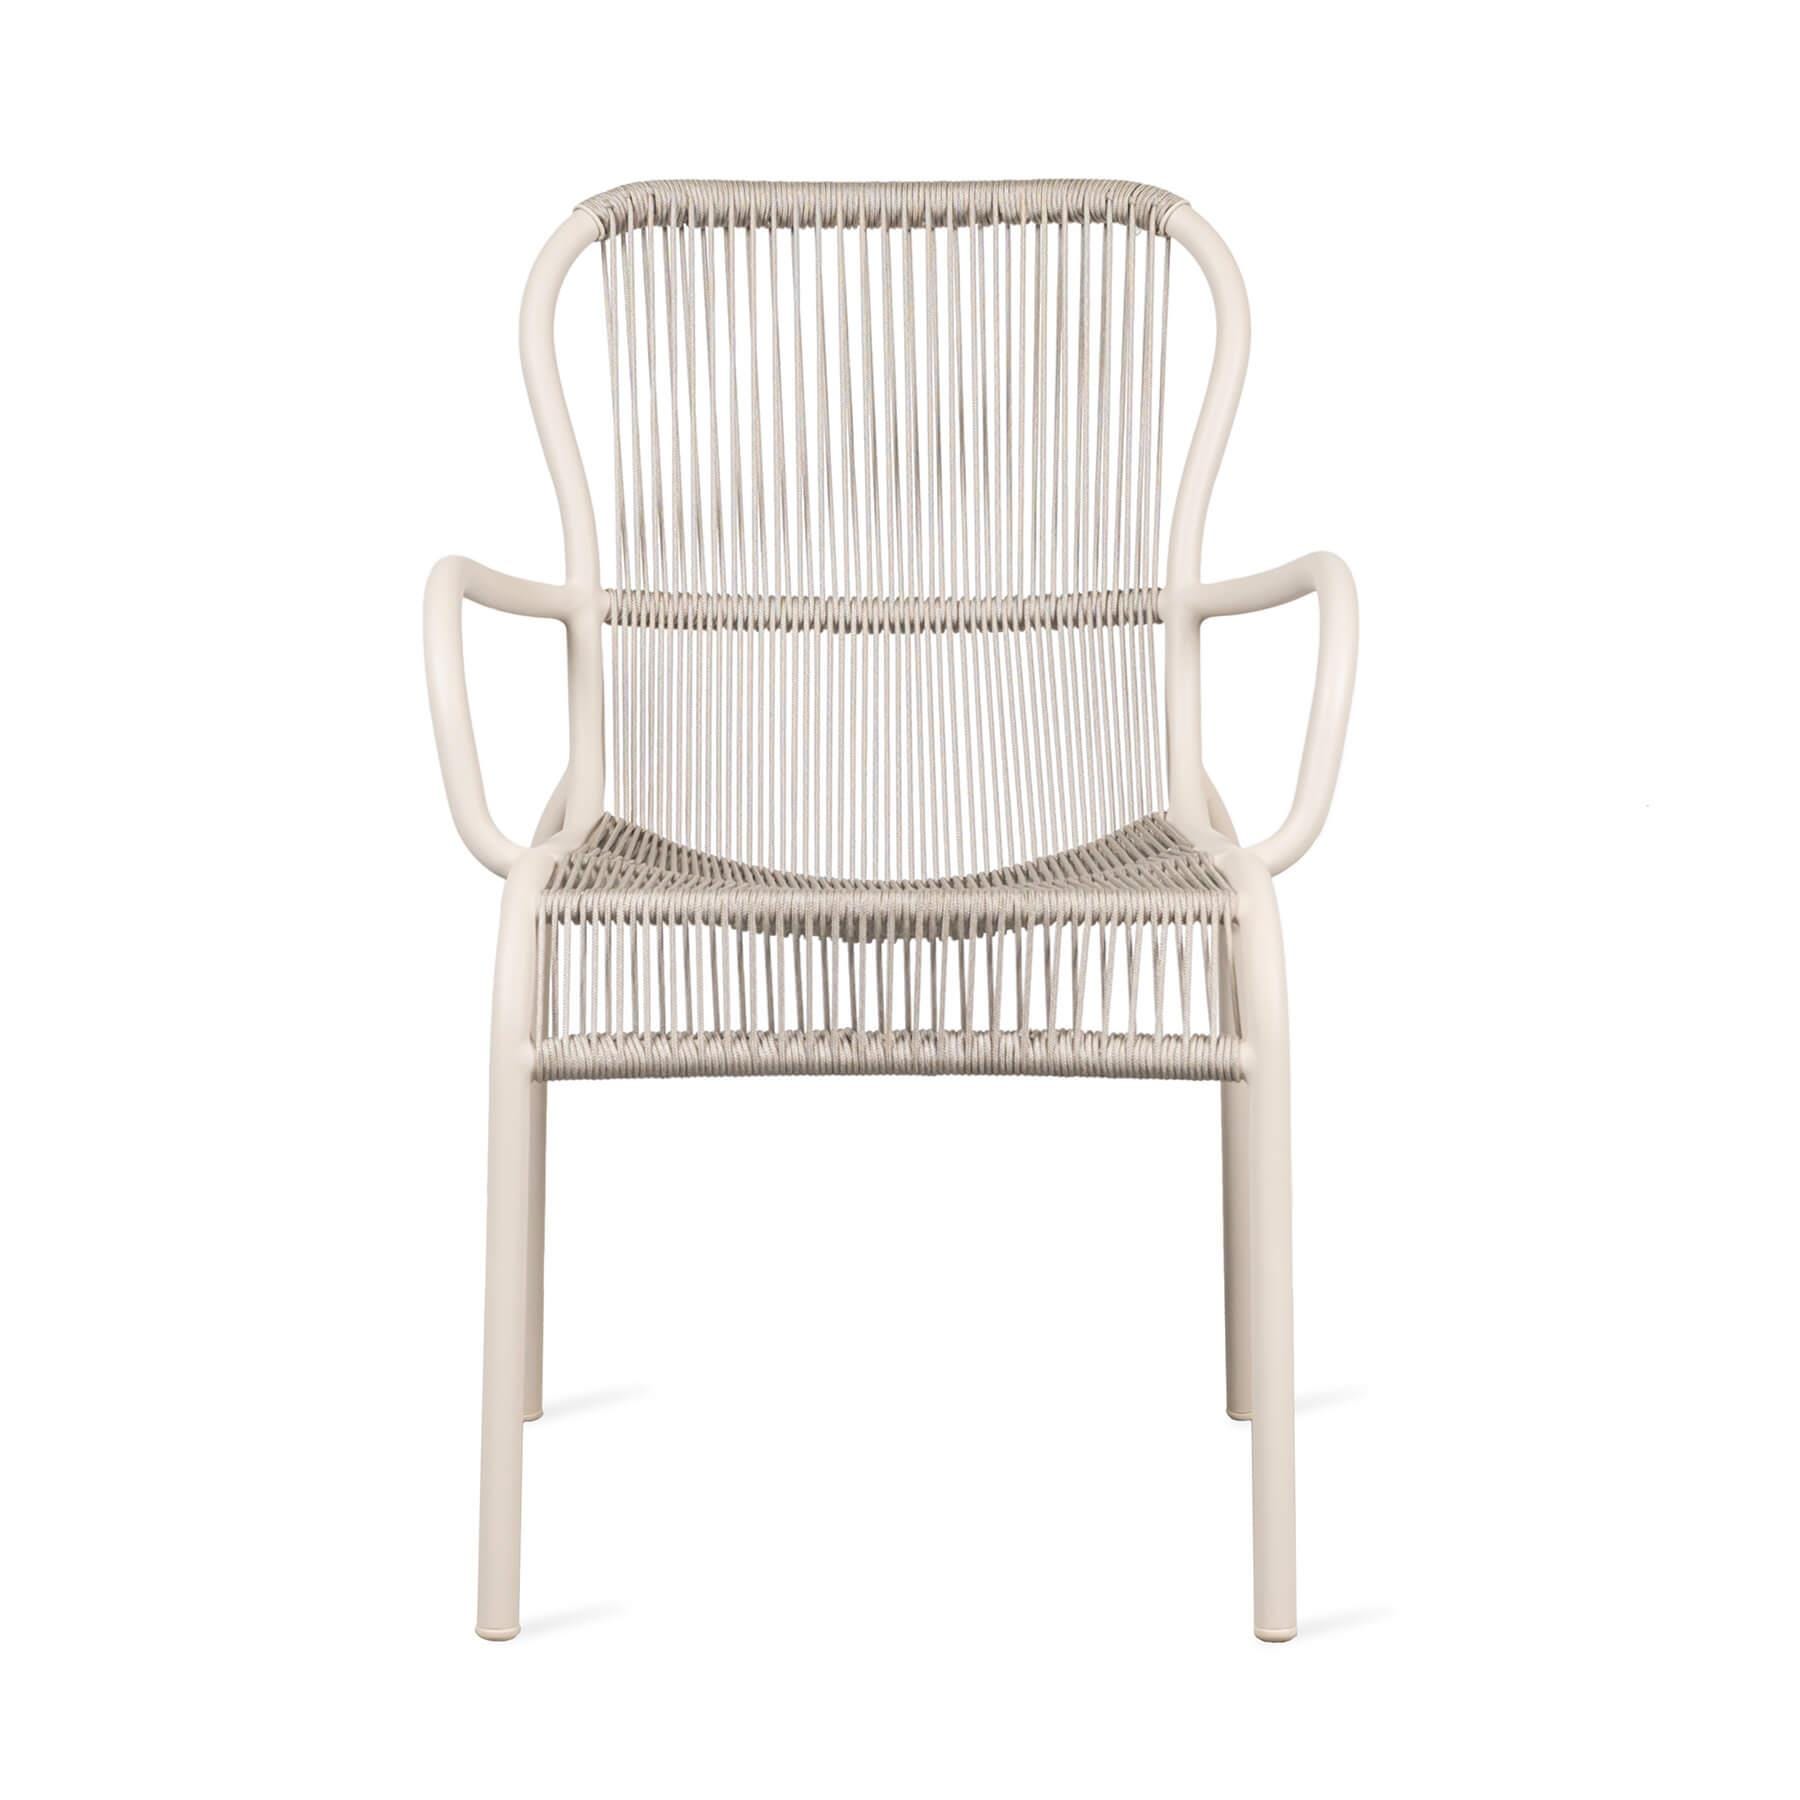 Vincent Sheppard Loop Garden Dining Chair Dune White Designer Furniture From Holloways Of Ludlow